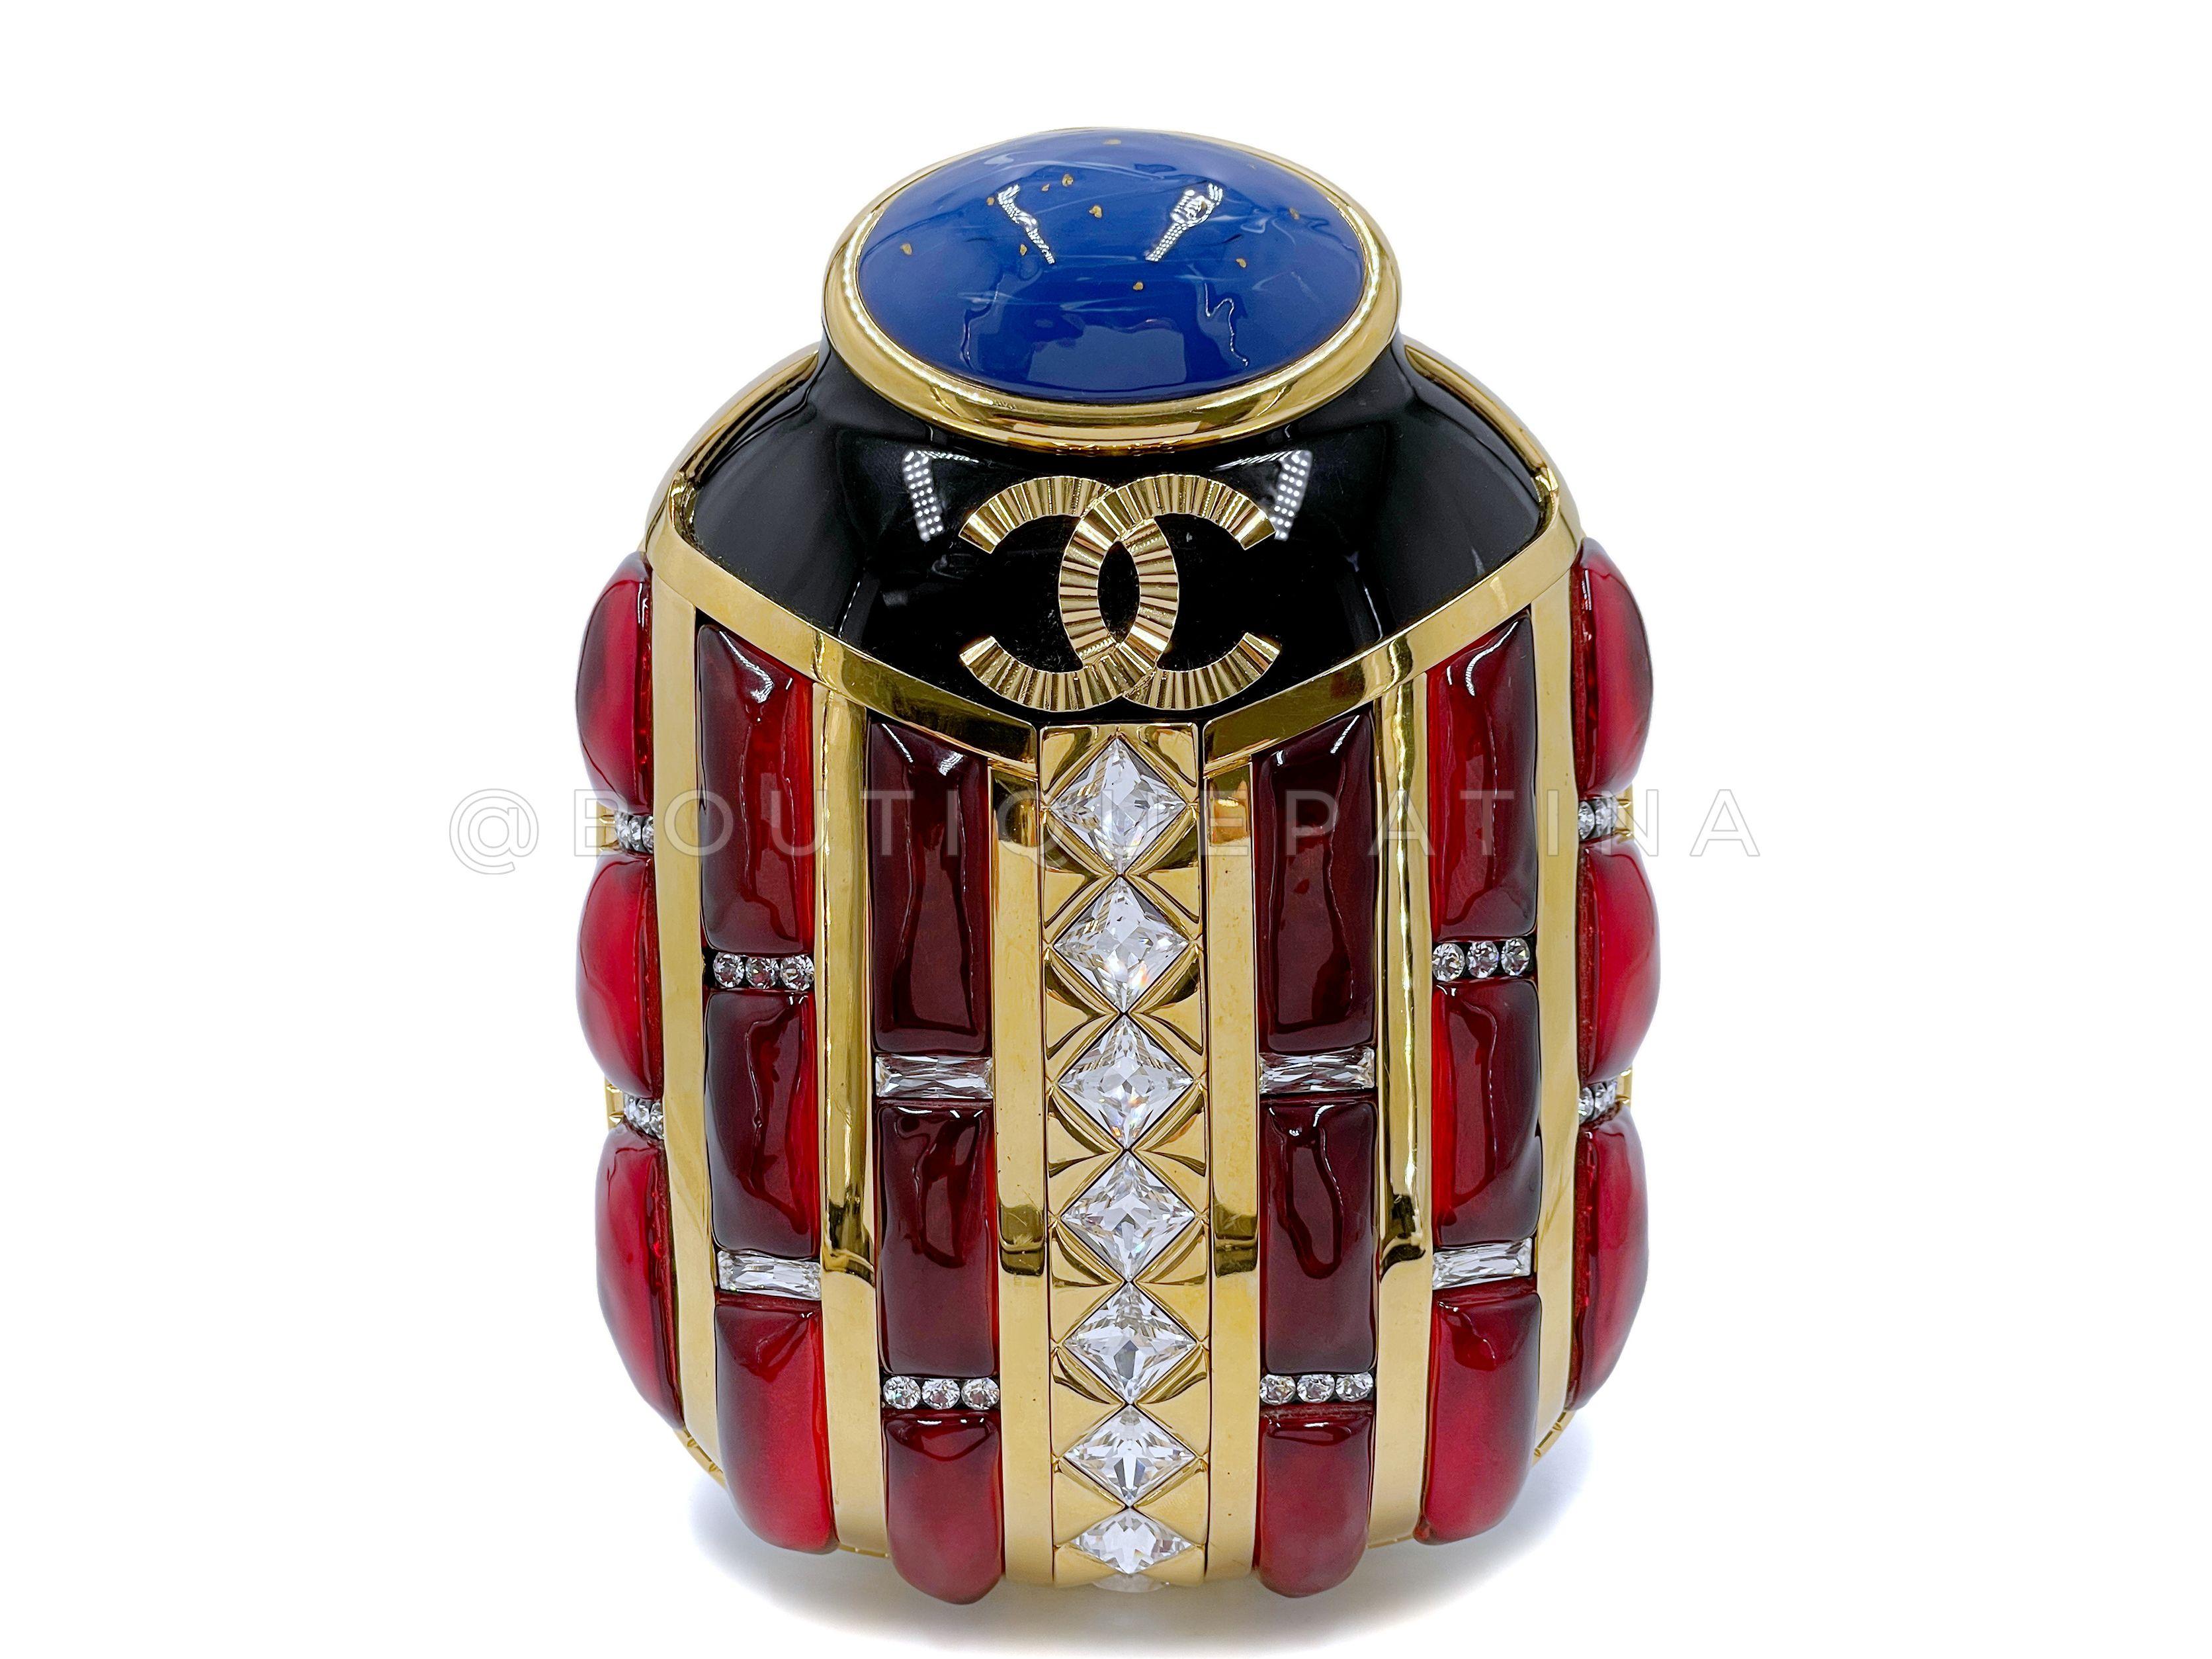 Store item: 67377
Chanel 2019 Egypt Paris-New York Scarab Minaudière Evening Clutch Bag

Egypt was the theme for Karl Lagerfeld's 2019 Métiers d'Art Paris-New York fall collection for Chanel. It remains one of the most historic collections to